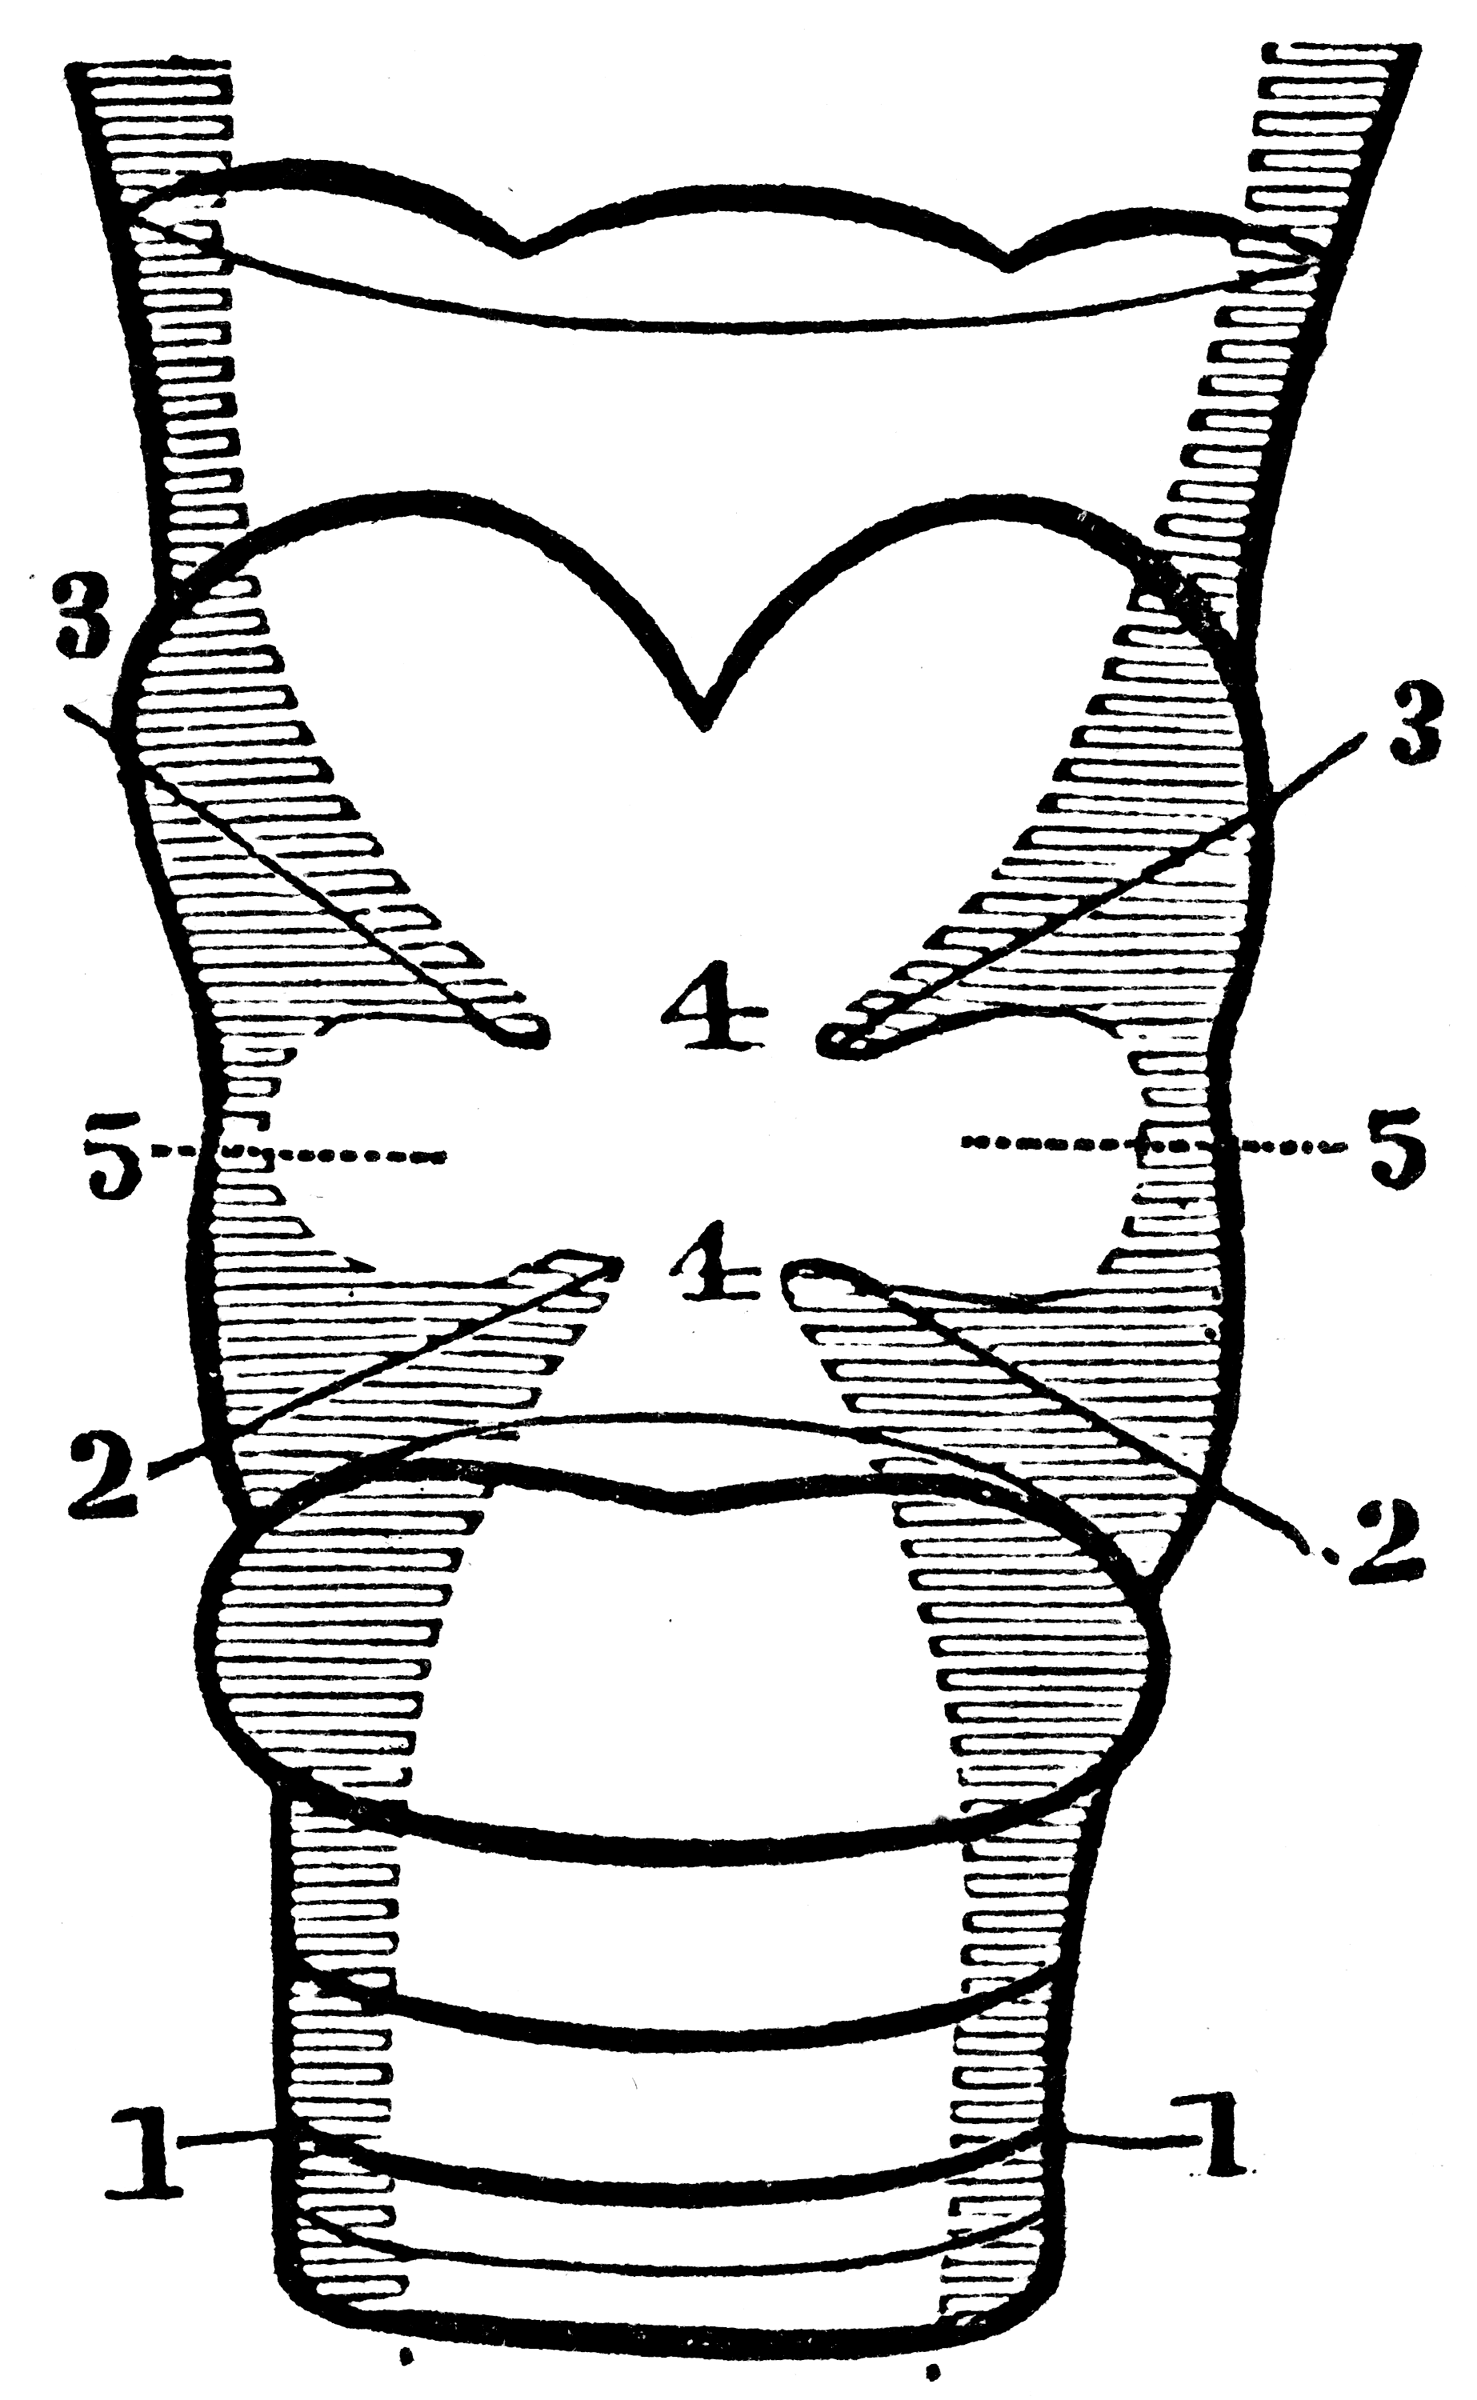 Section of the Larynx | ClipArt ETC